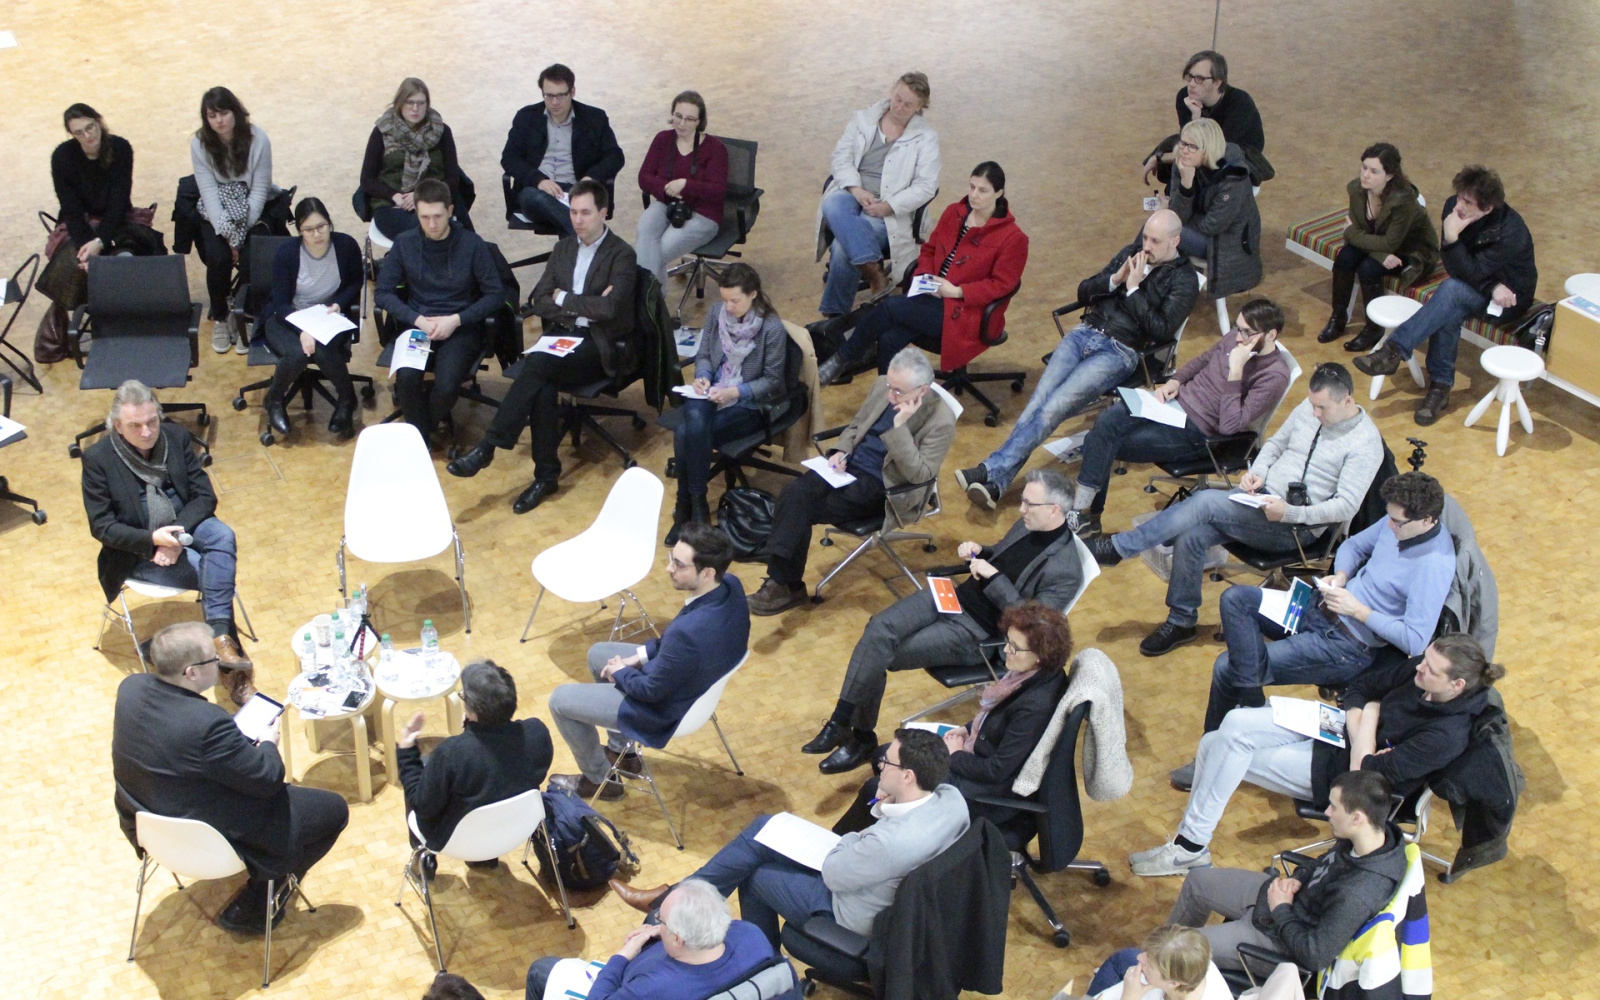 View of the discussion round from above